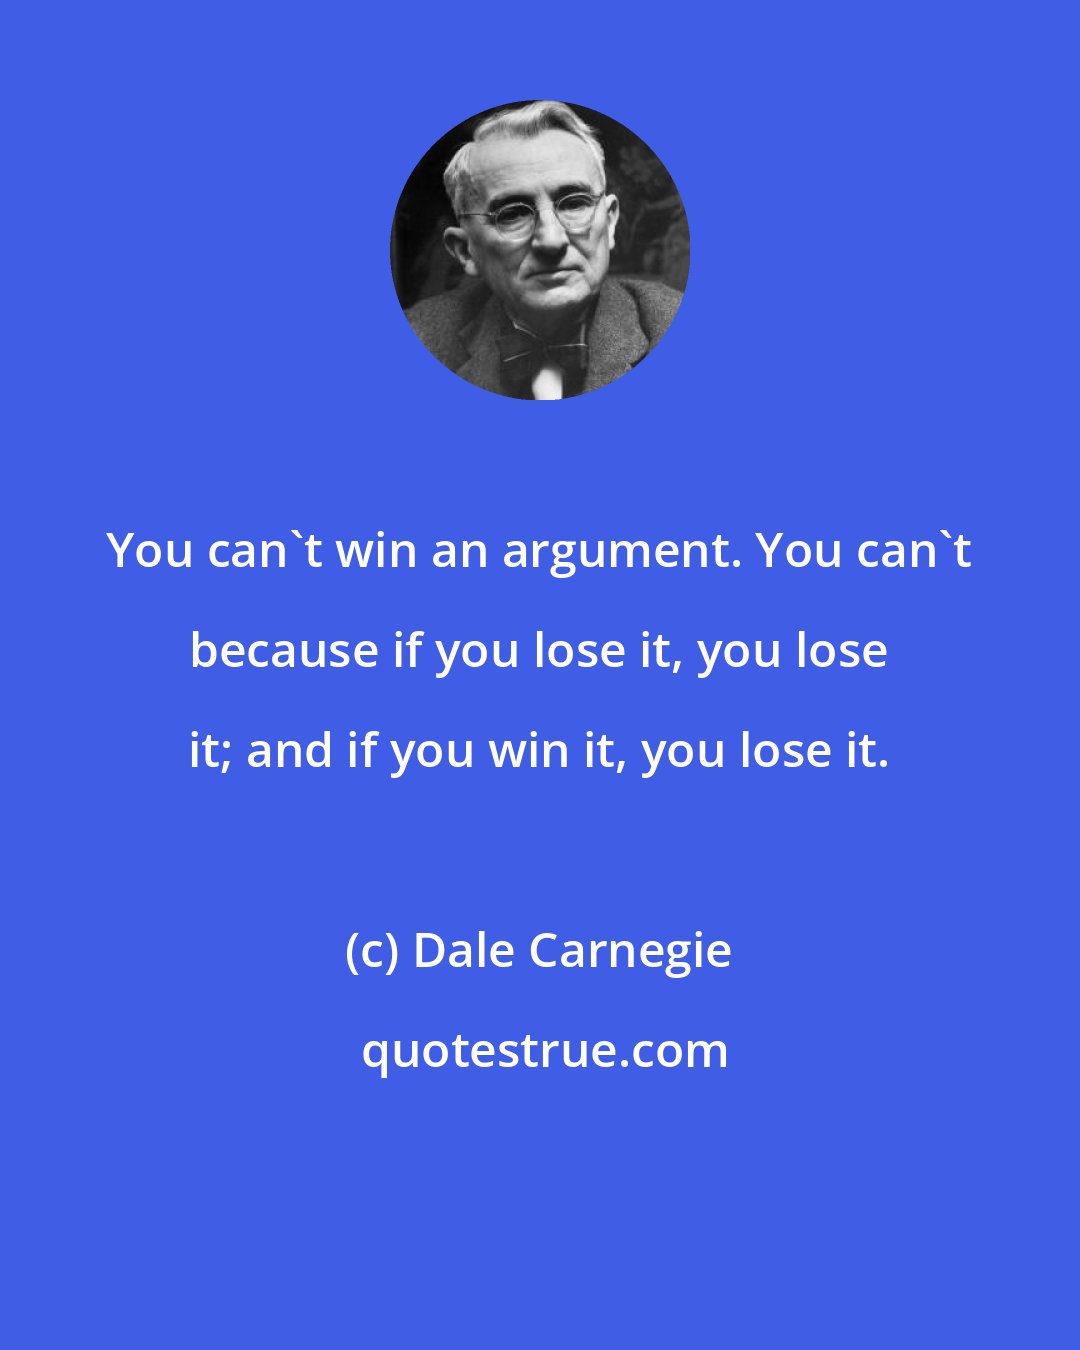 Dale Carnegie: You can't win an argument. You can't because if you lose it, you lose it; and if you win it, you lose it.